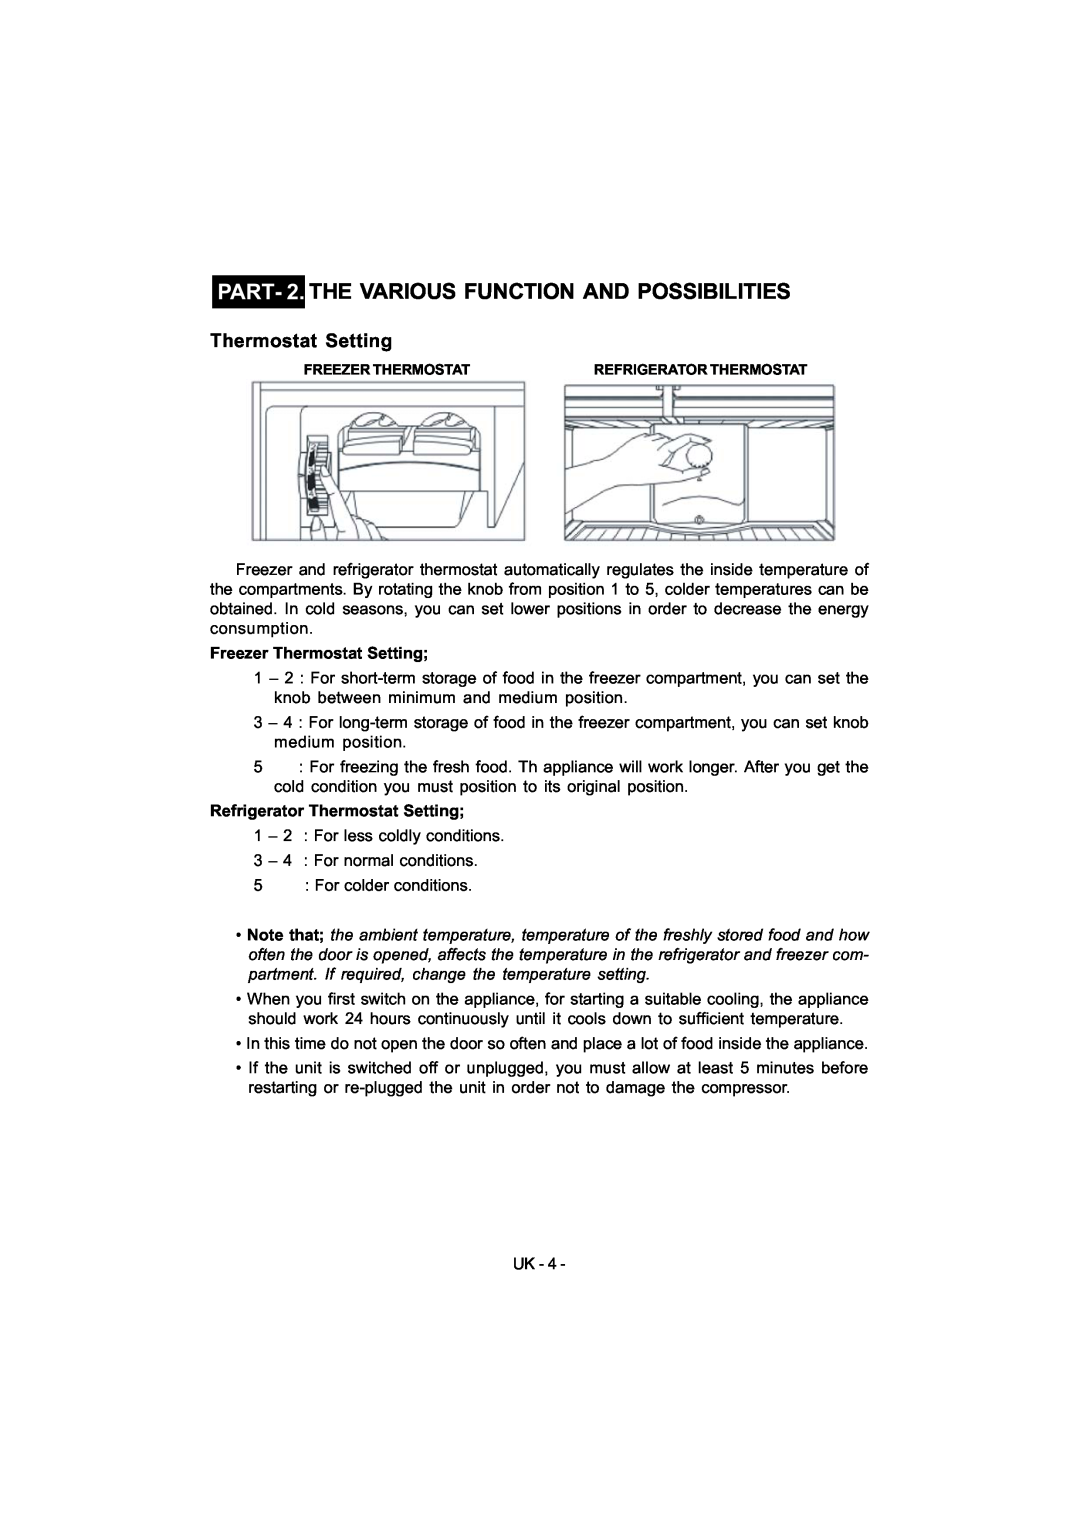 Smeg FD54APXNF manual PART- 2. THE VARIOUS FUNCTION AND POSSIBILITIES, Thermostat Setting 